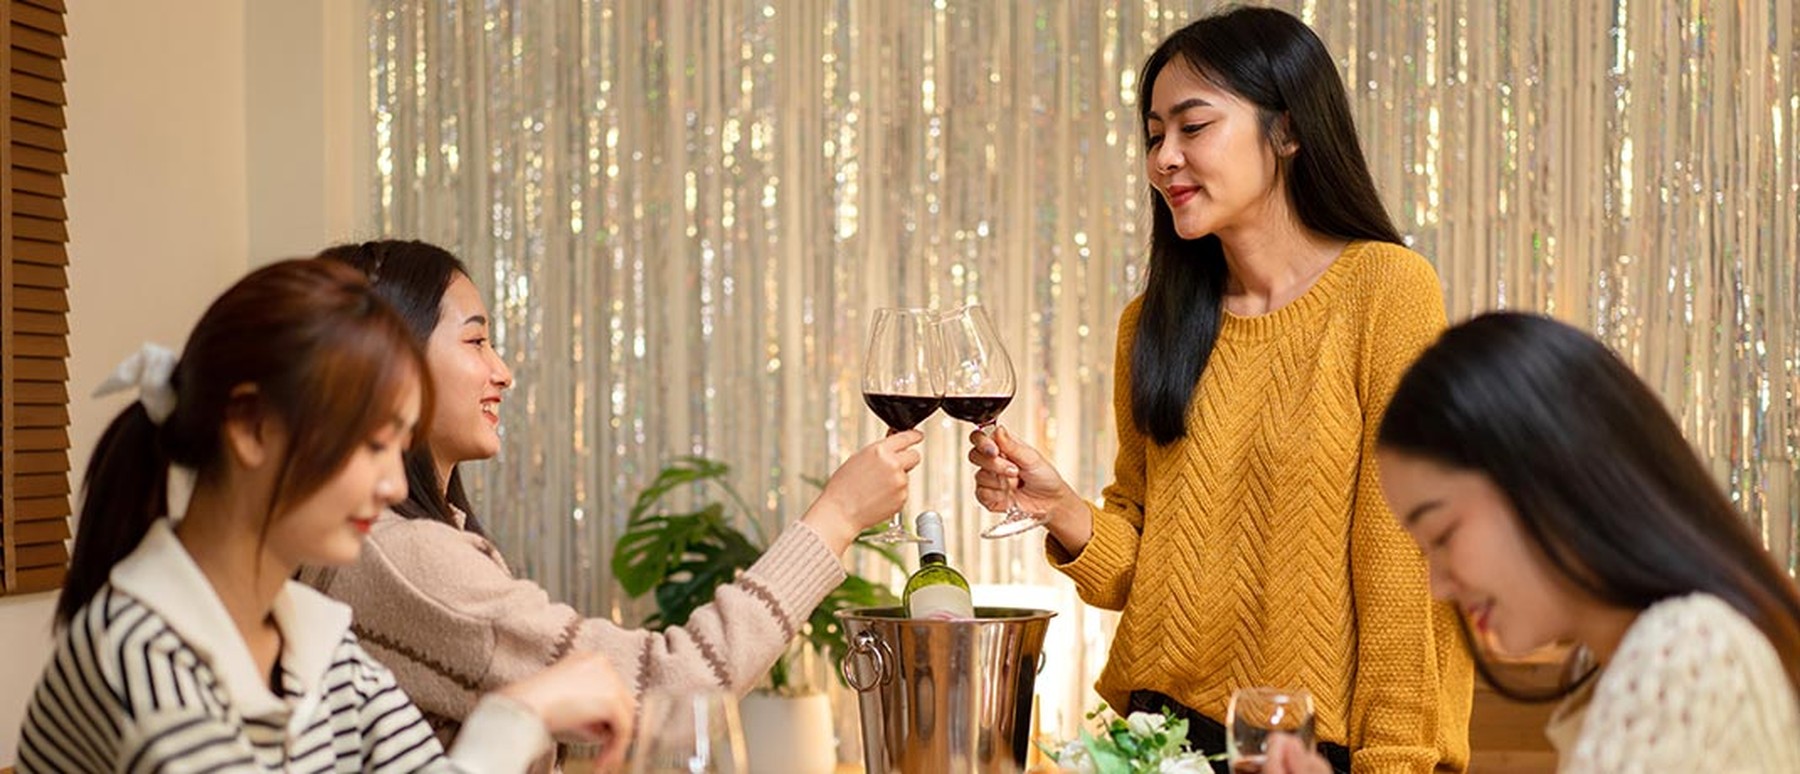 Multi-cultural women drinking wine at a party